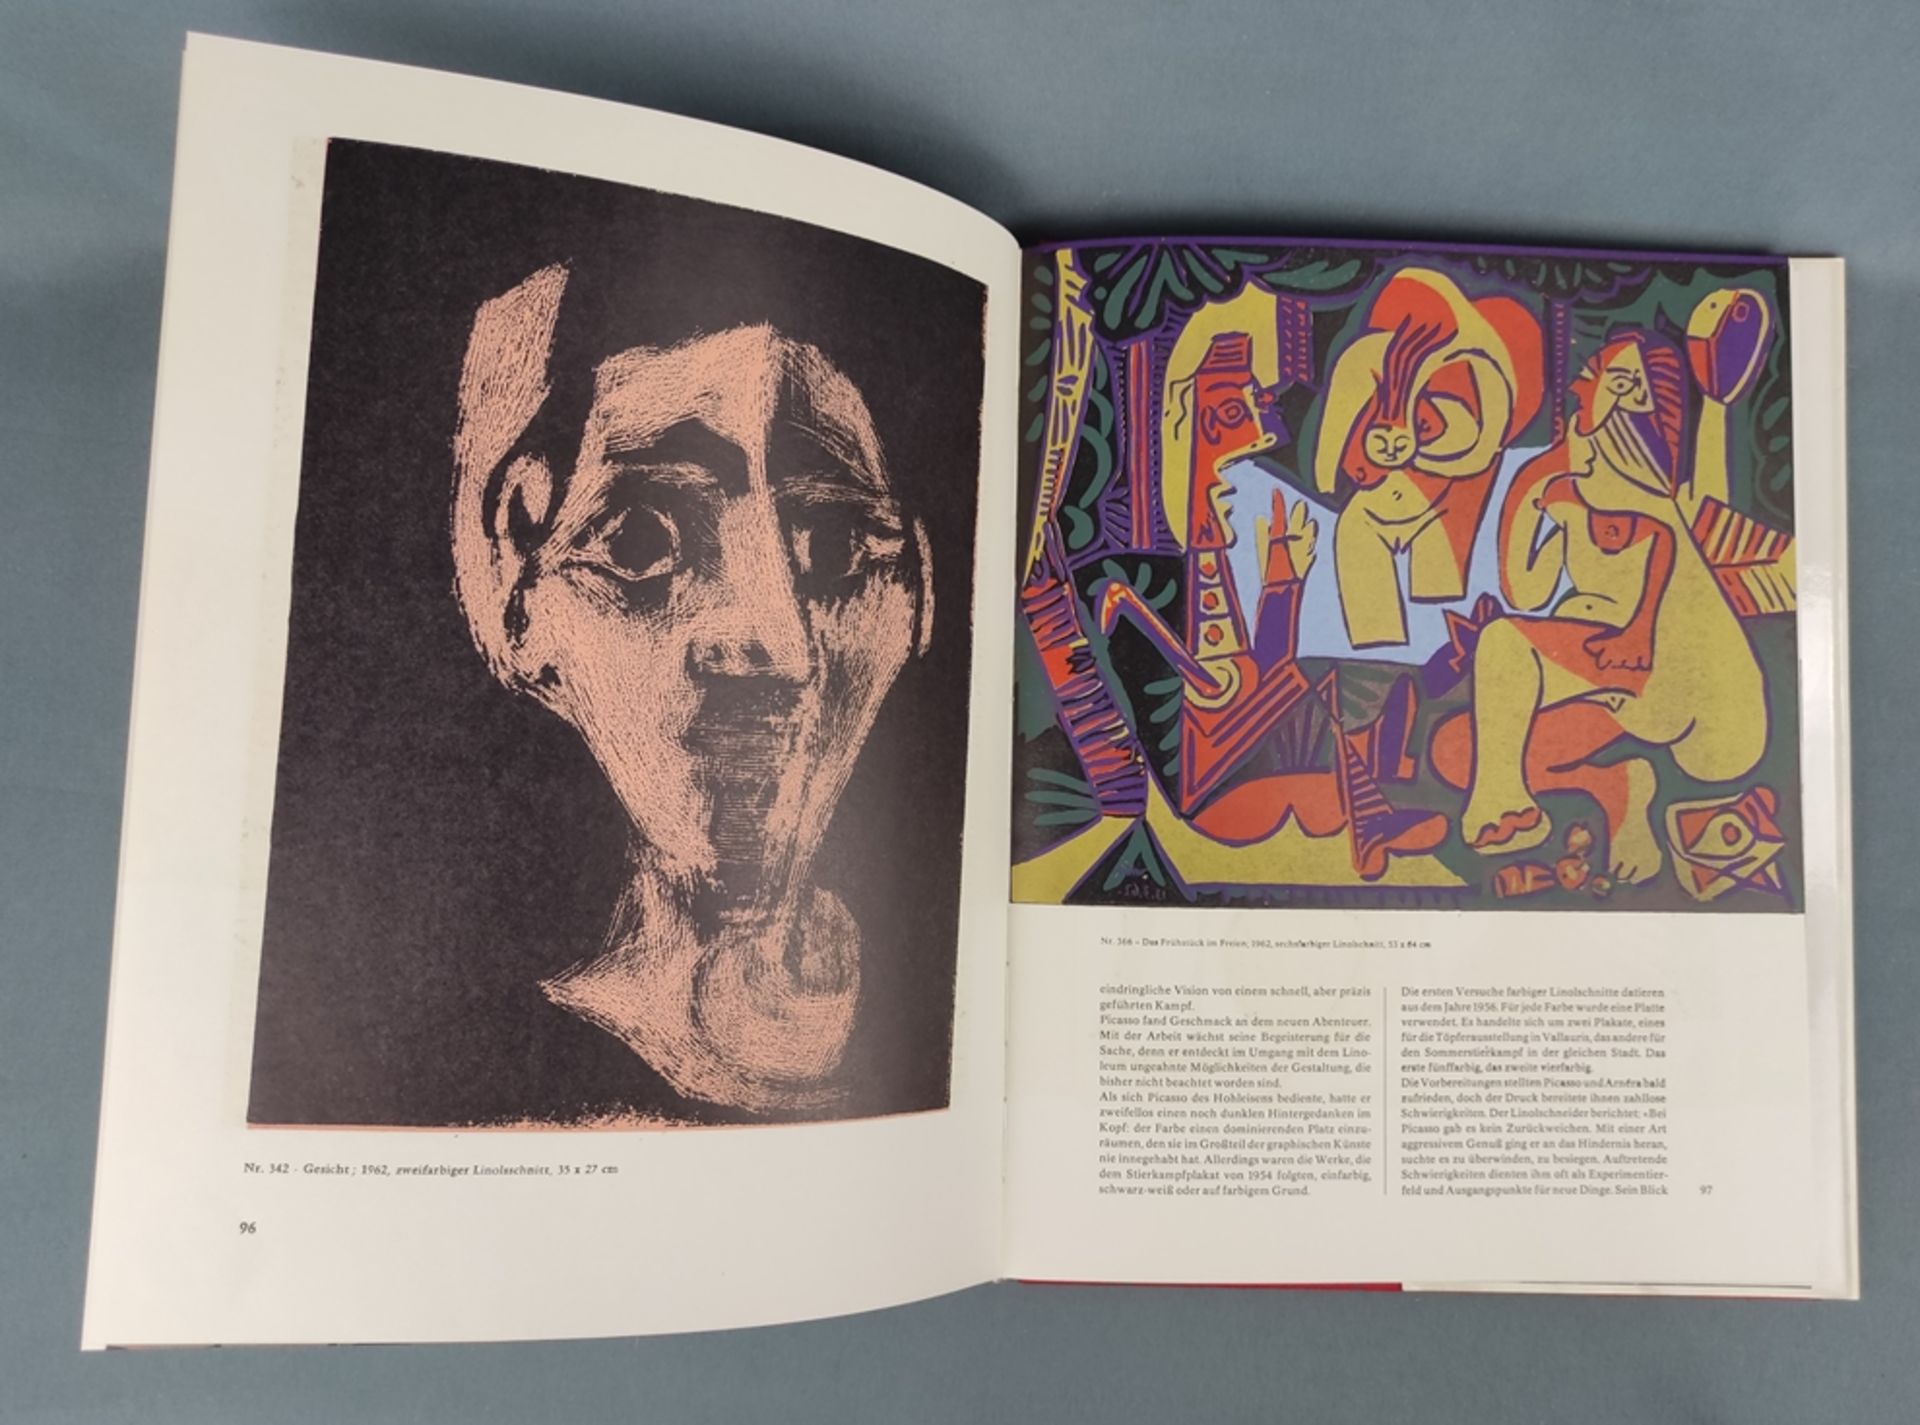 San Lazzaro, G. di (ed. ) "Hommage á Pablo Picasso", 136 pages, Ebeling, Wiesbaden 1976, with origi - Image 6 of 8